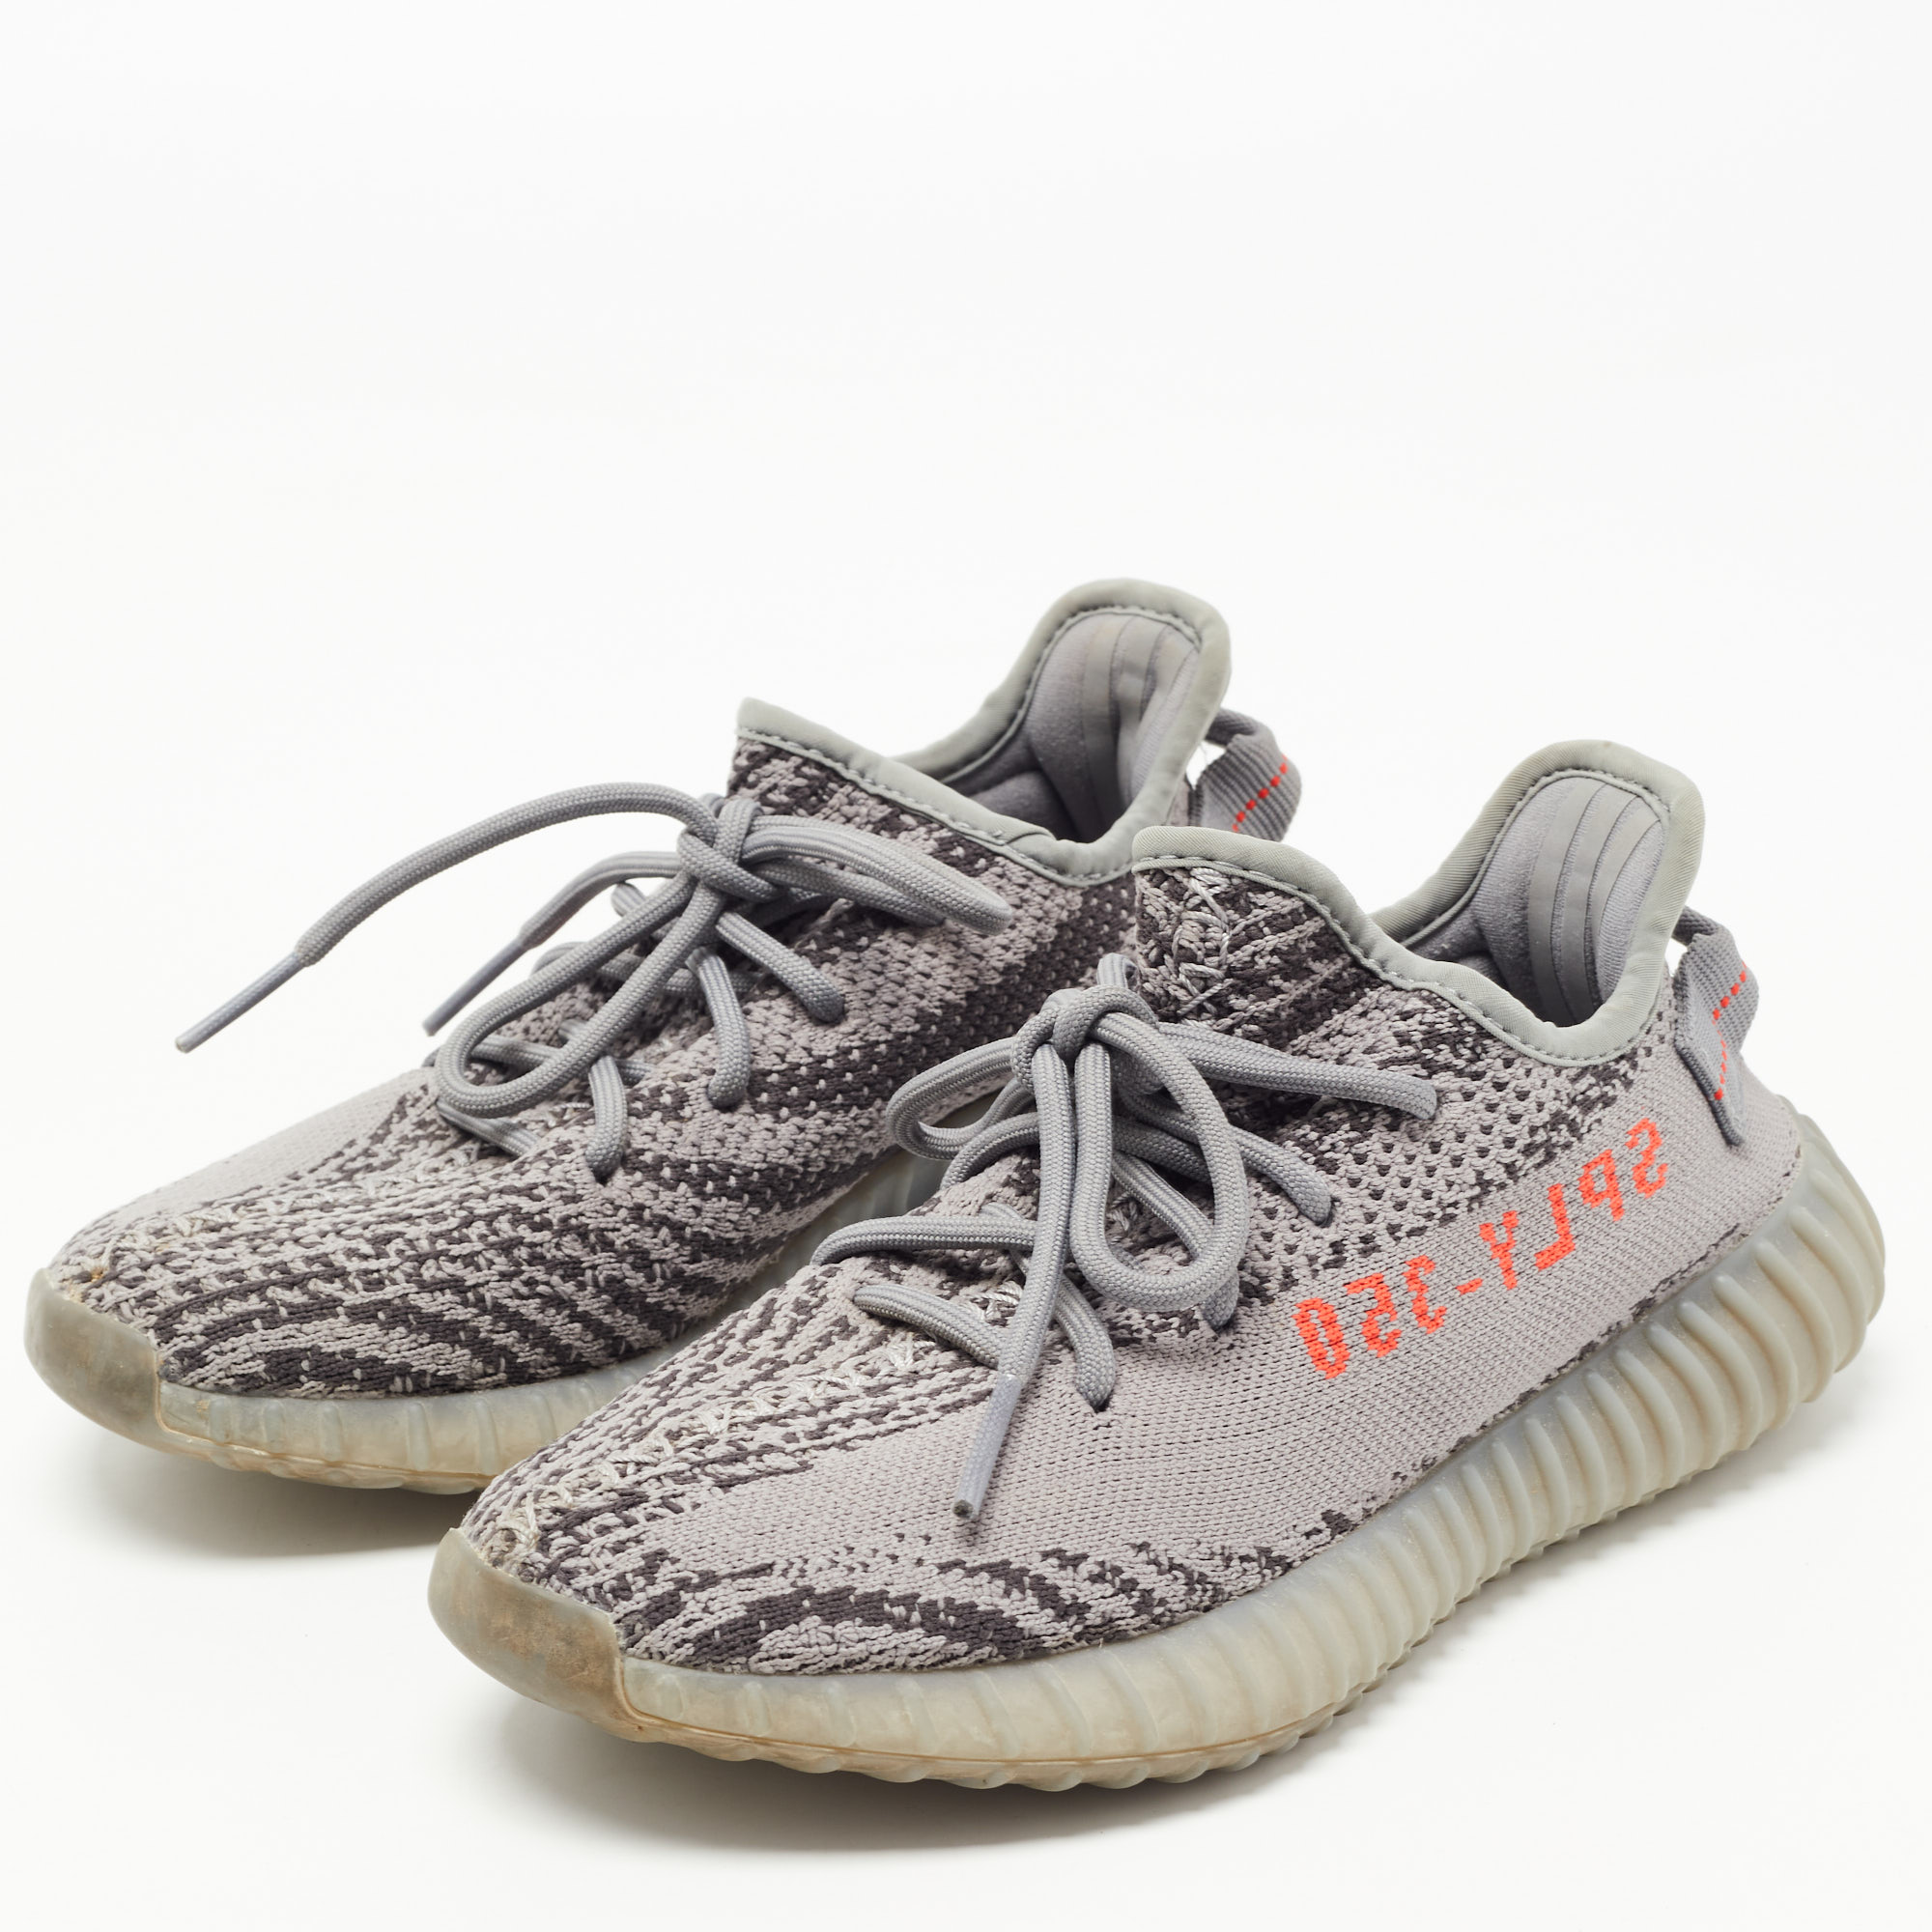 

Yeezy x Adidas Grey Knit Fabric Boost 350 V2 Beluga Sneakers Size 37 1/3